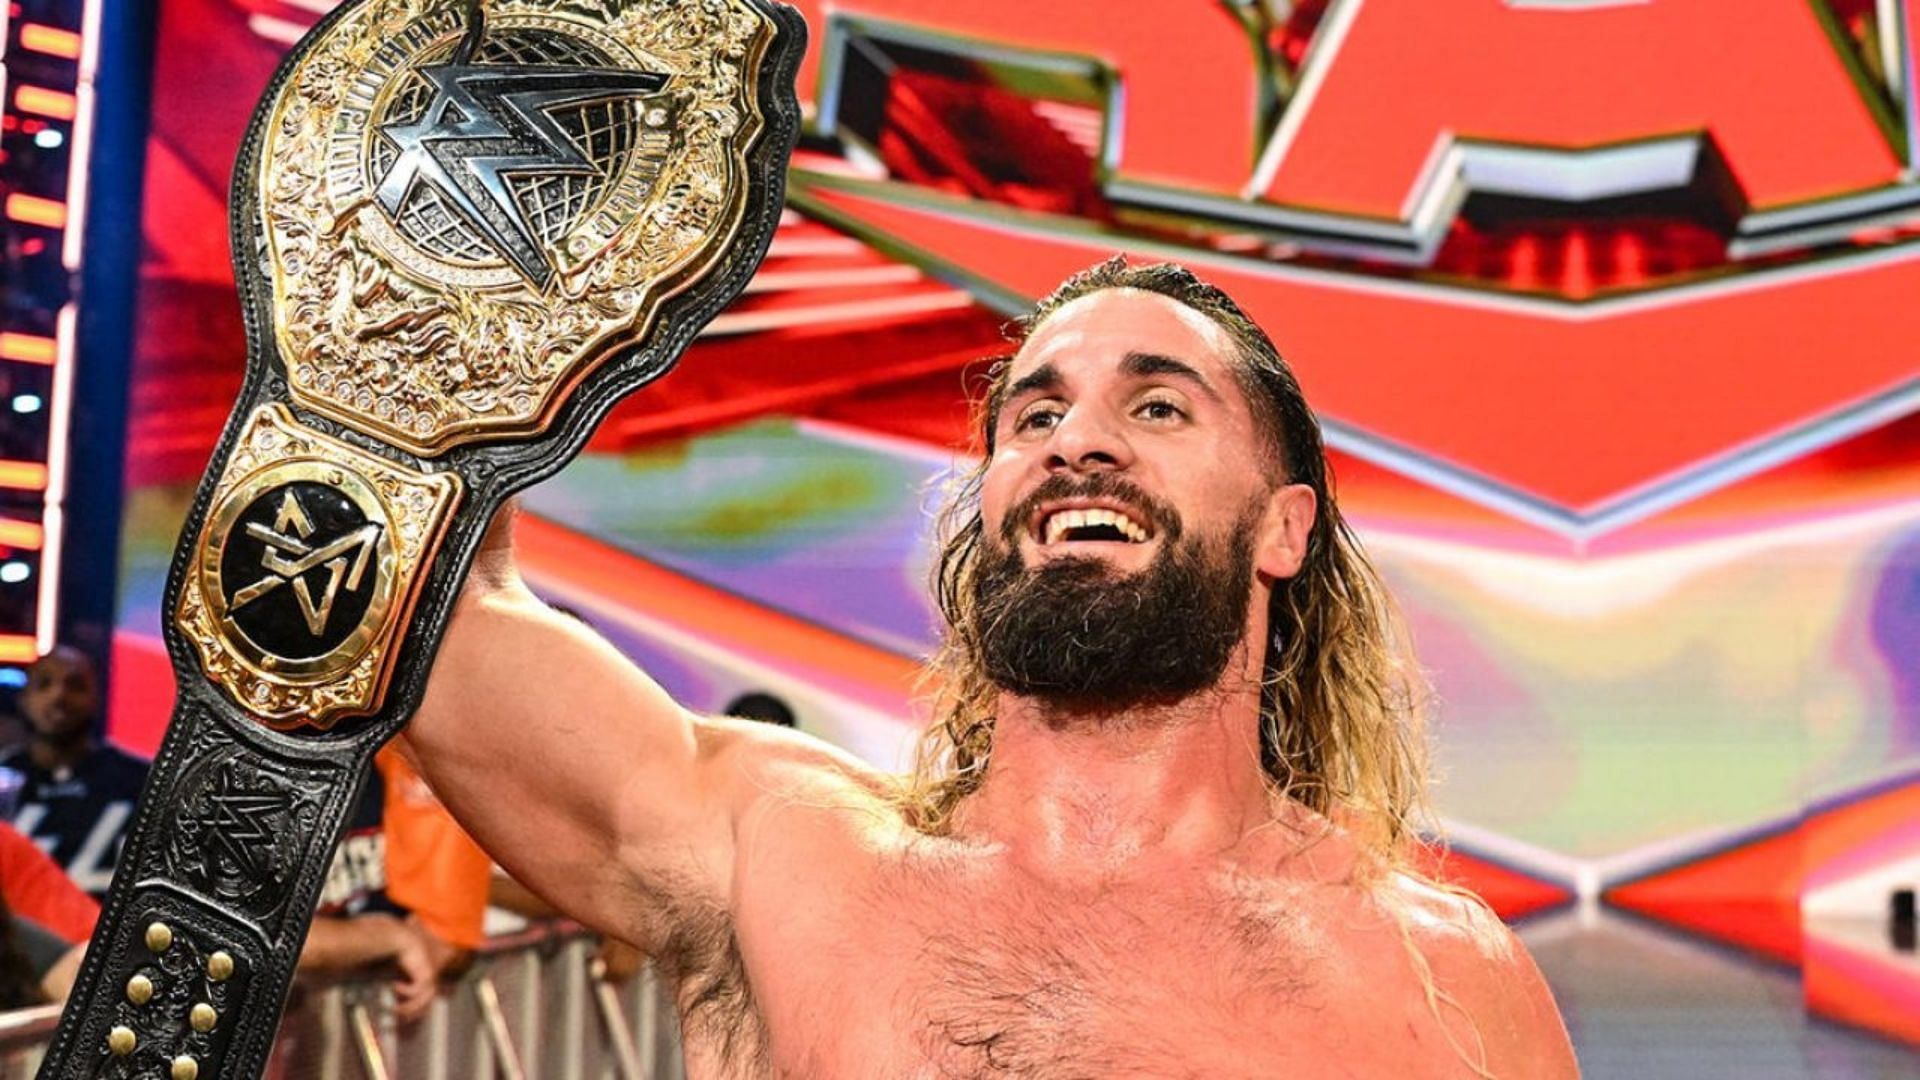 Seth Rollins is the current World Heavyweight Champion.